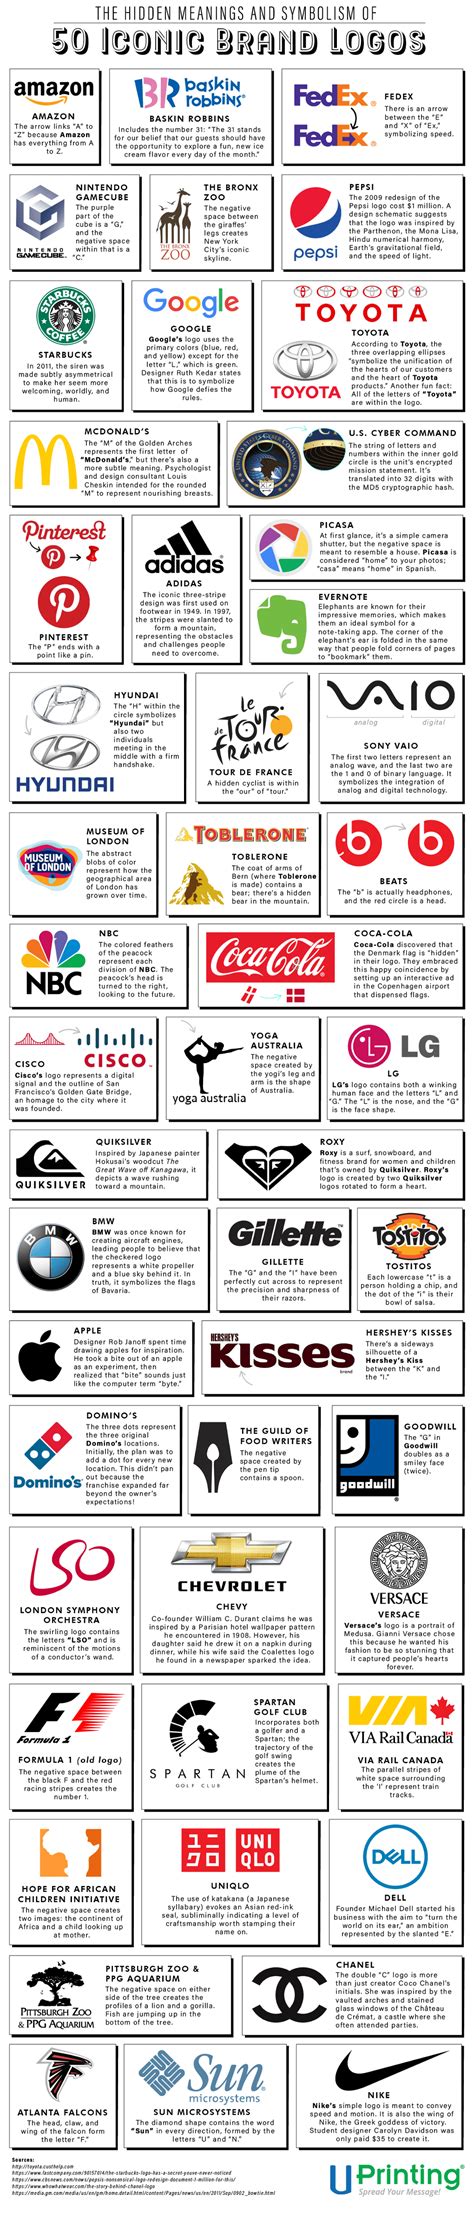 50 Iconic Brand Logos And Then Hidden Meanings DesignPorn